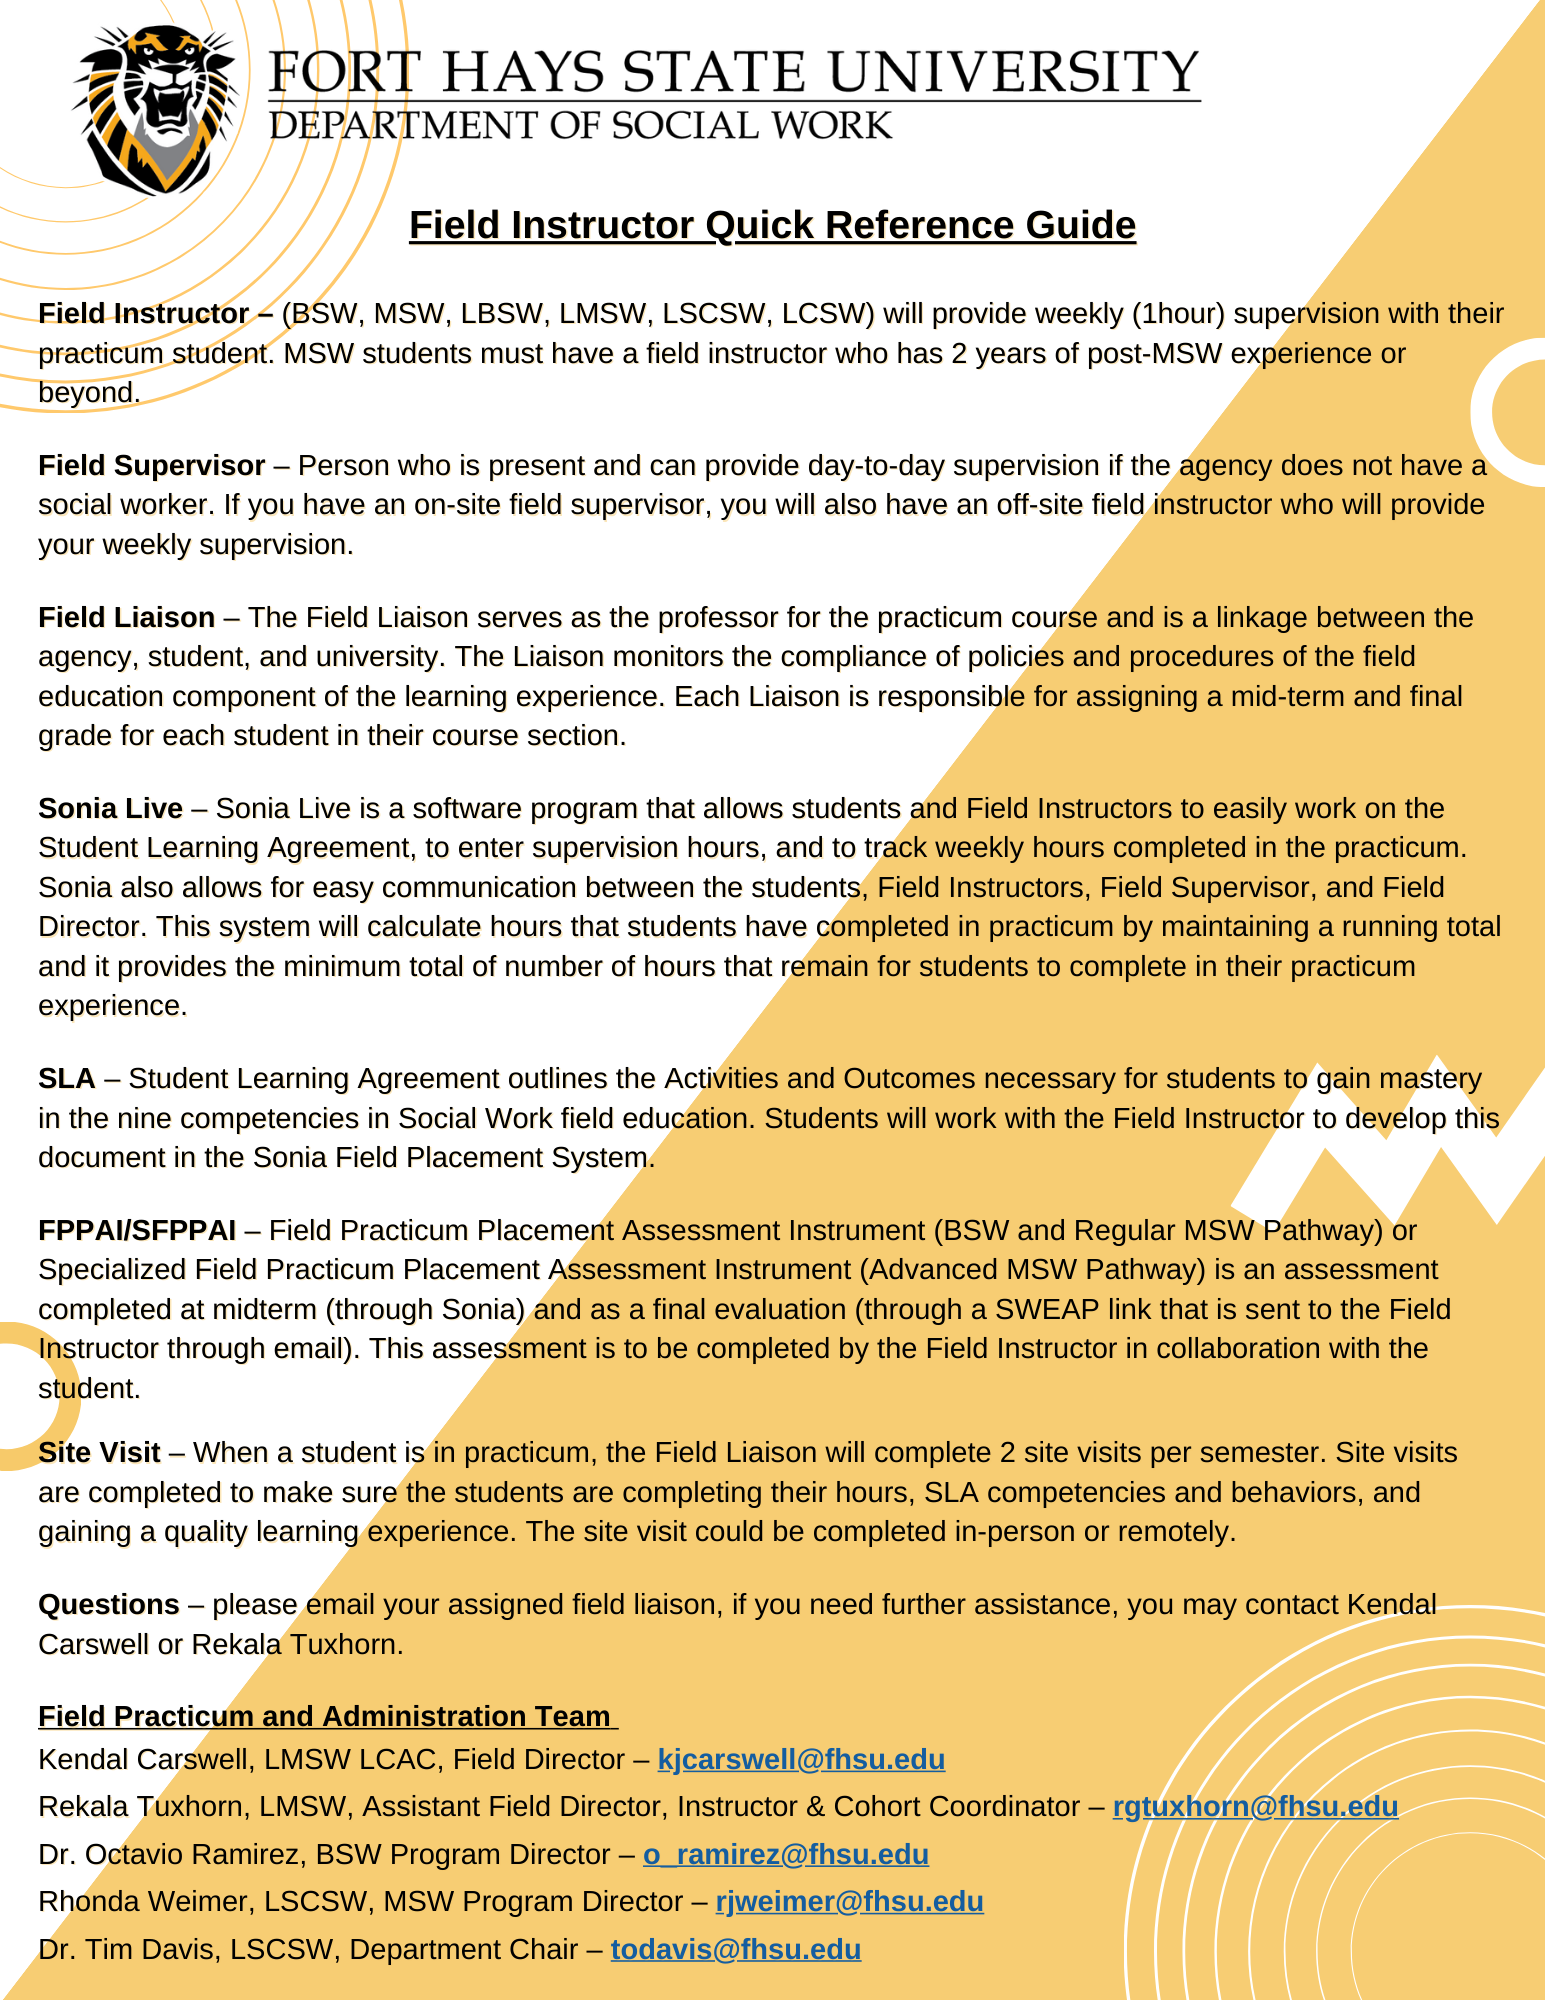 field-instructor-quick-reference-guide-1.png